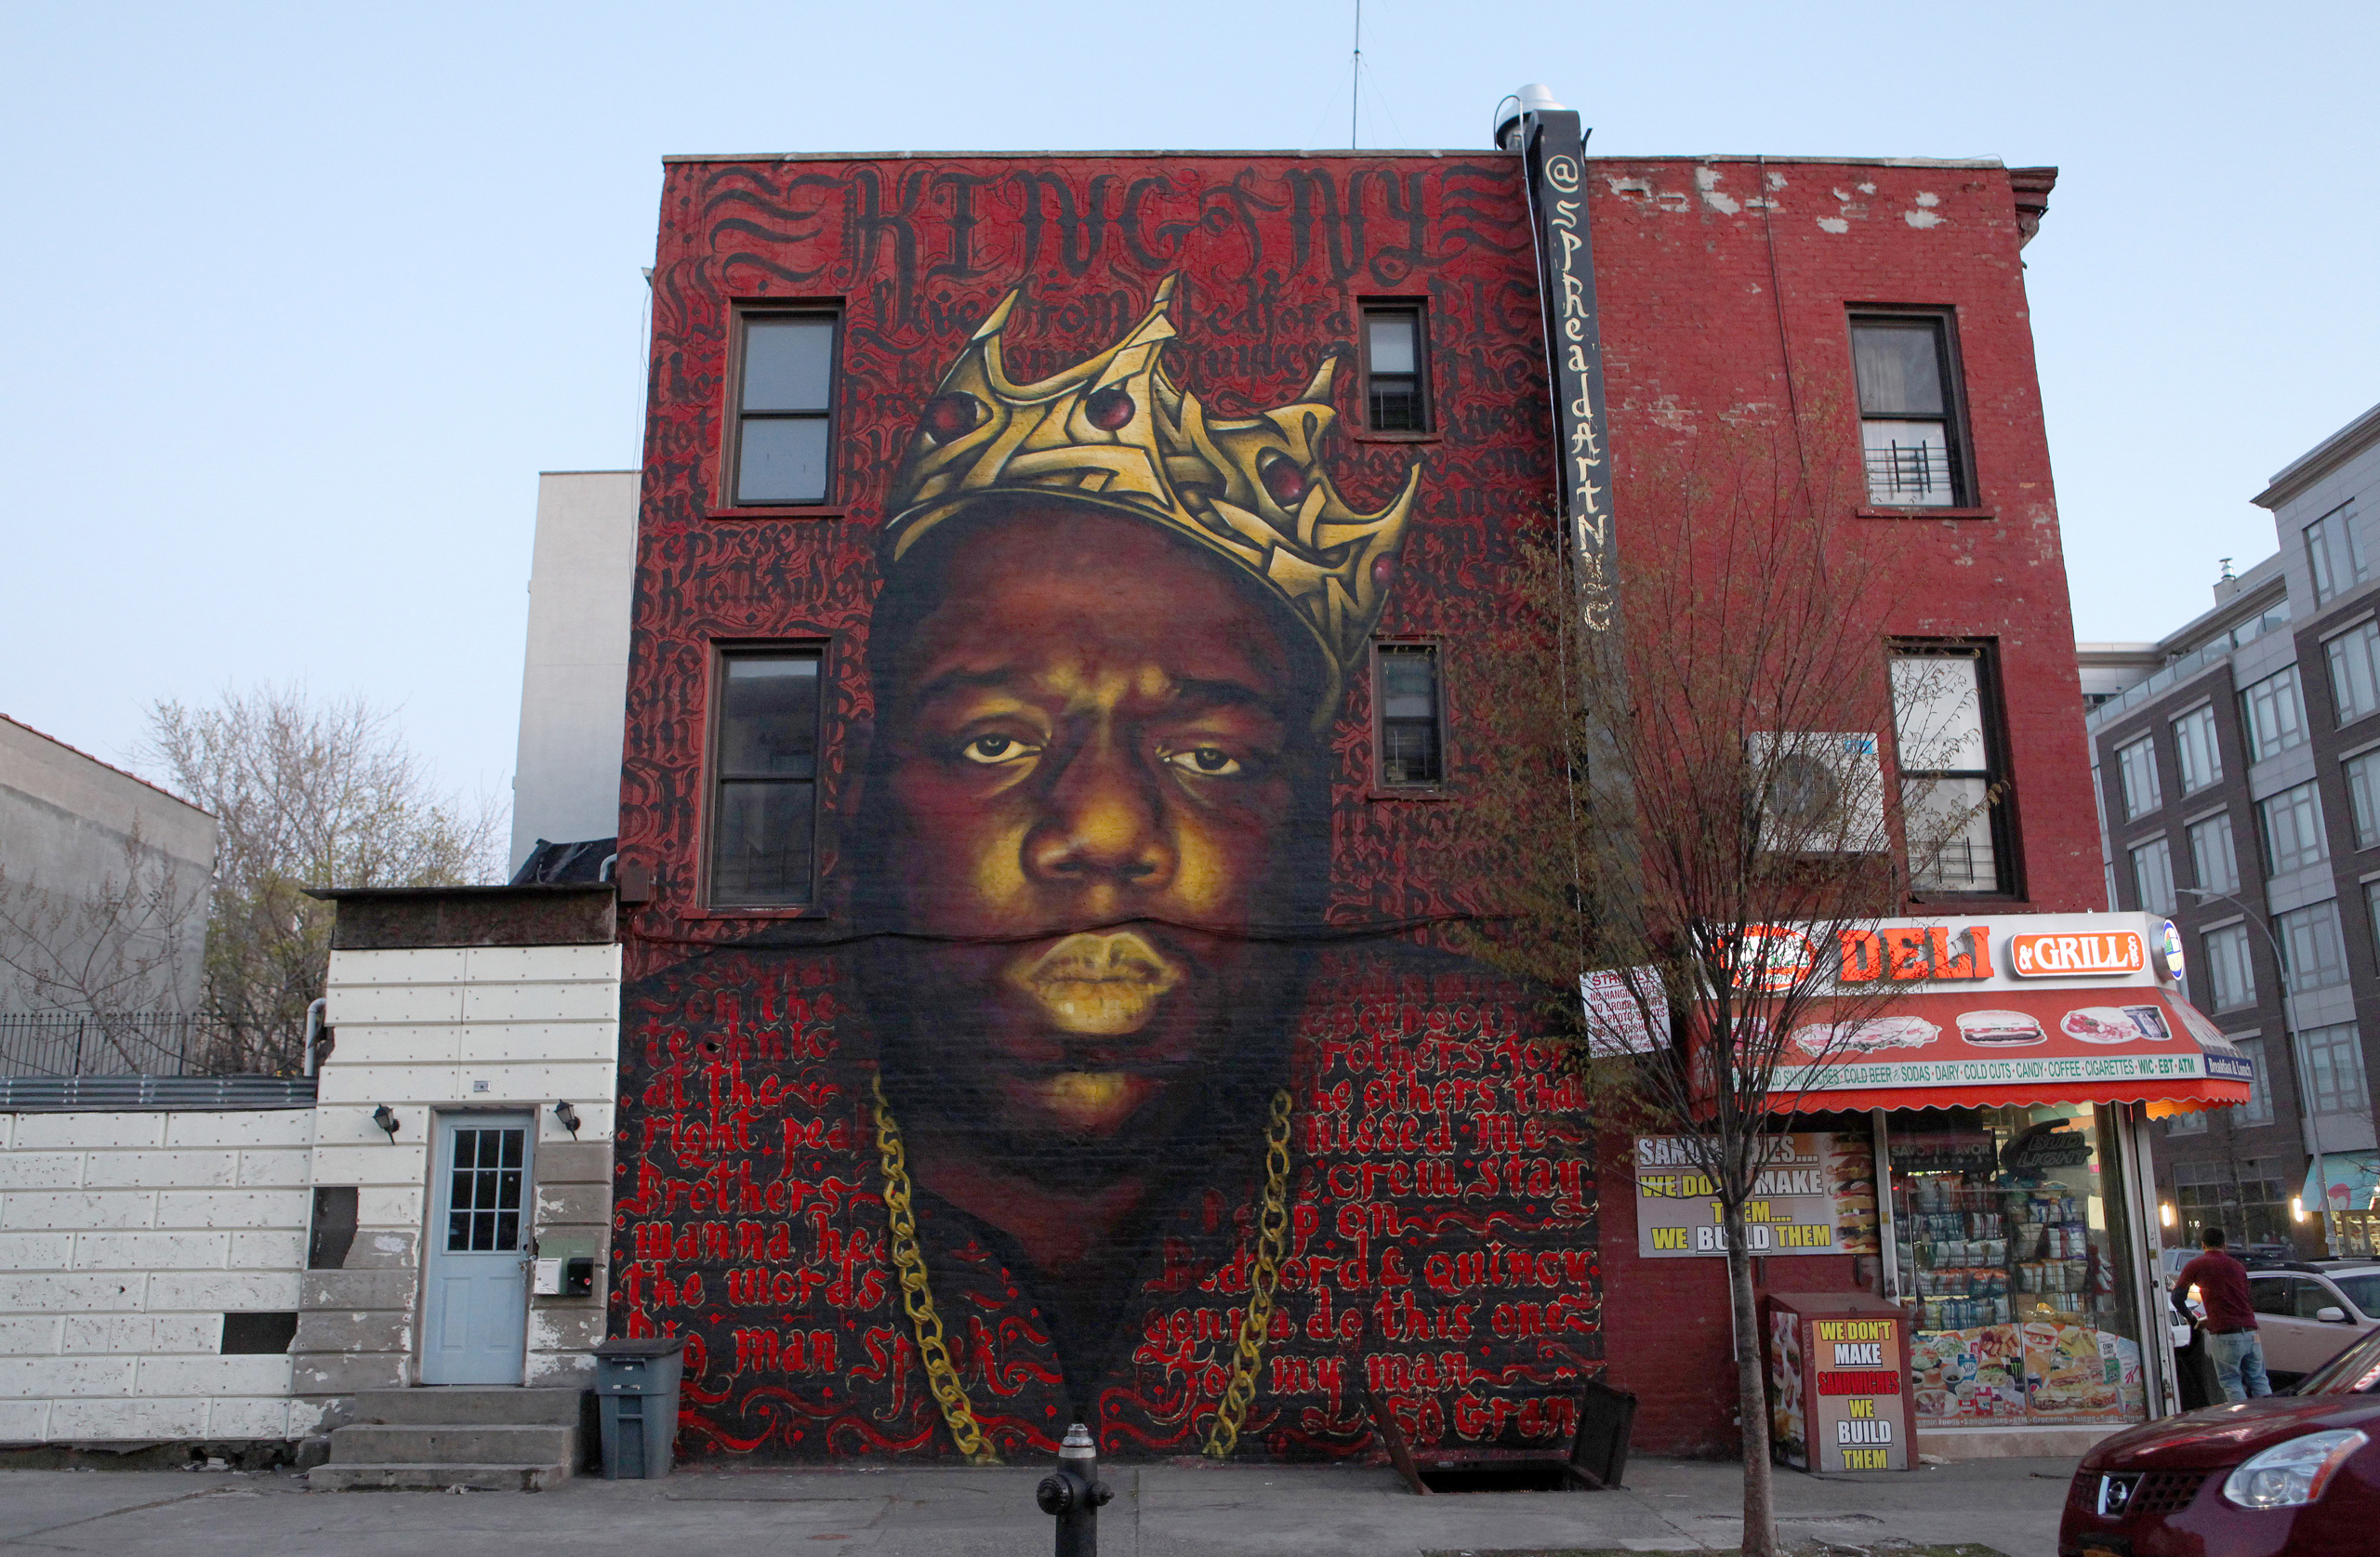 Scott 'Zimer' Zimmerman and Naoufal 'Rocko' Alaoui's mural of late rapper Christopher 'Notorious B.I.G.' Wallace in the Bedford-Stuyvesant neighborhood of Brooklyn, New York on April 15, 2016. (Raymond Boyd—Getty Images)